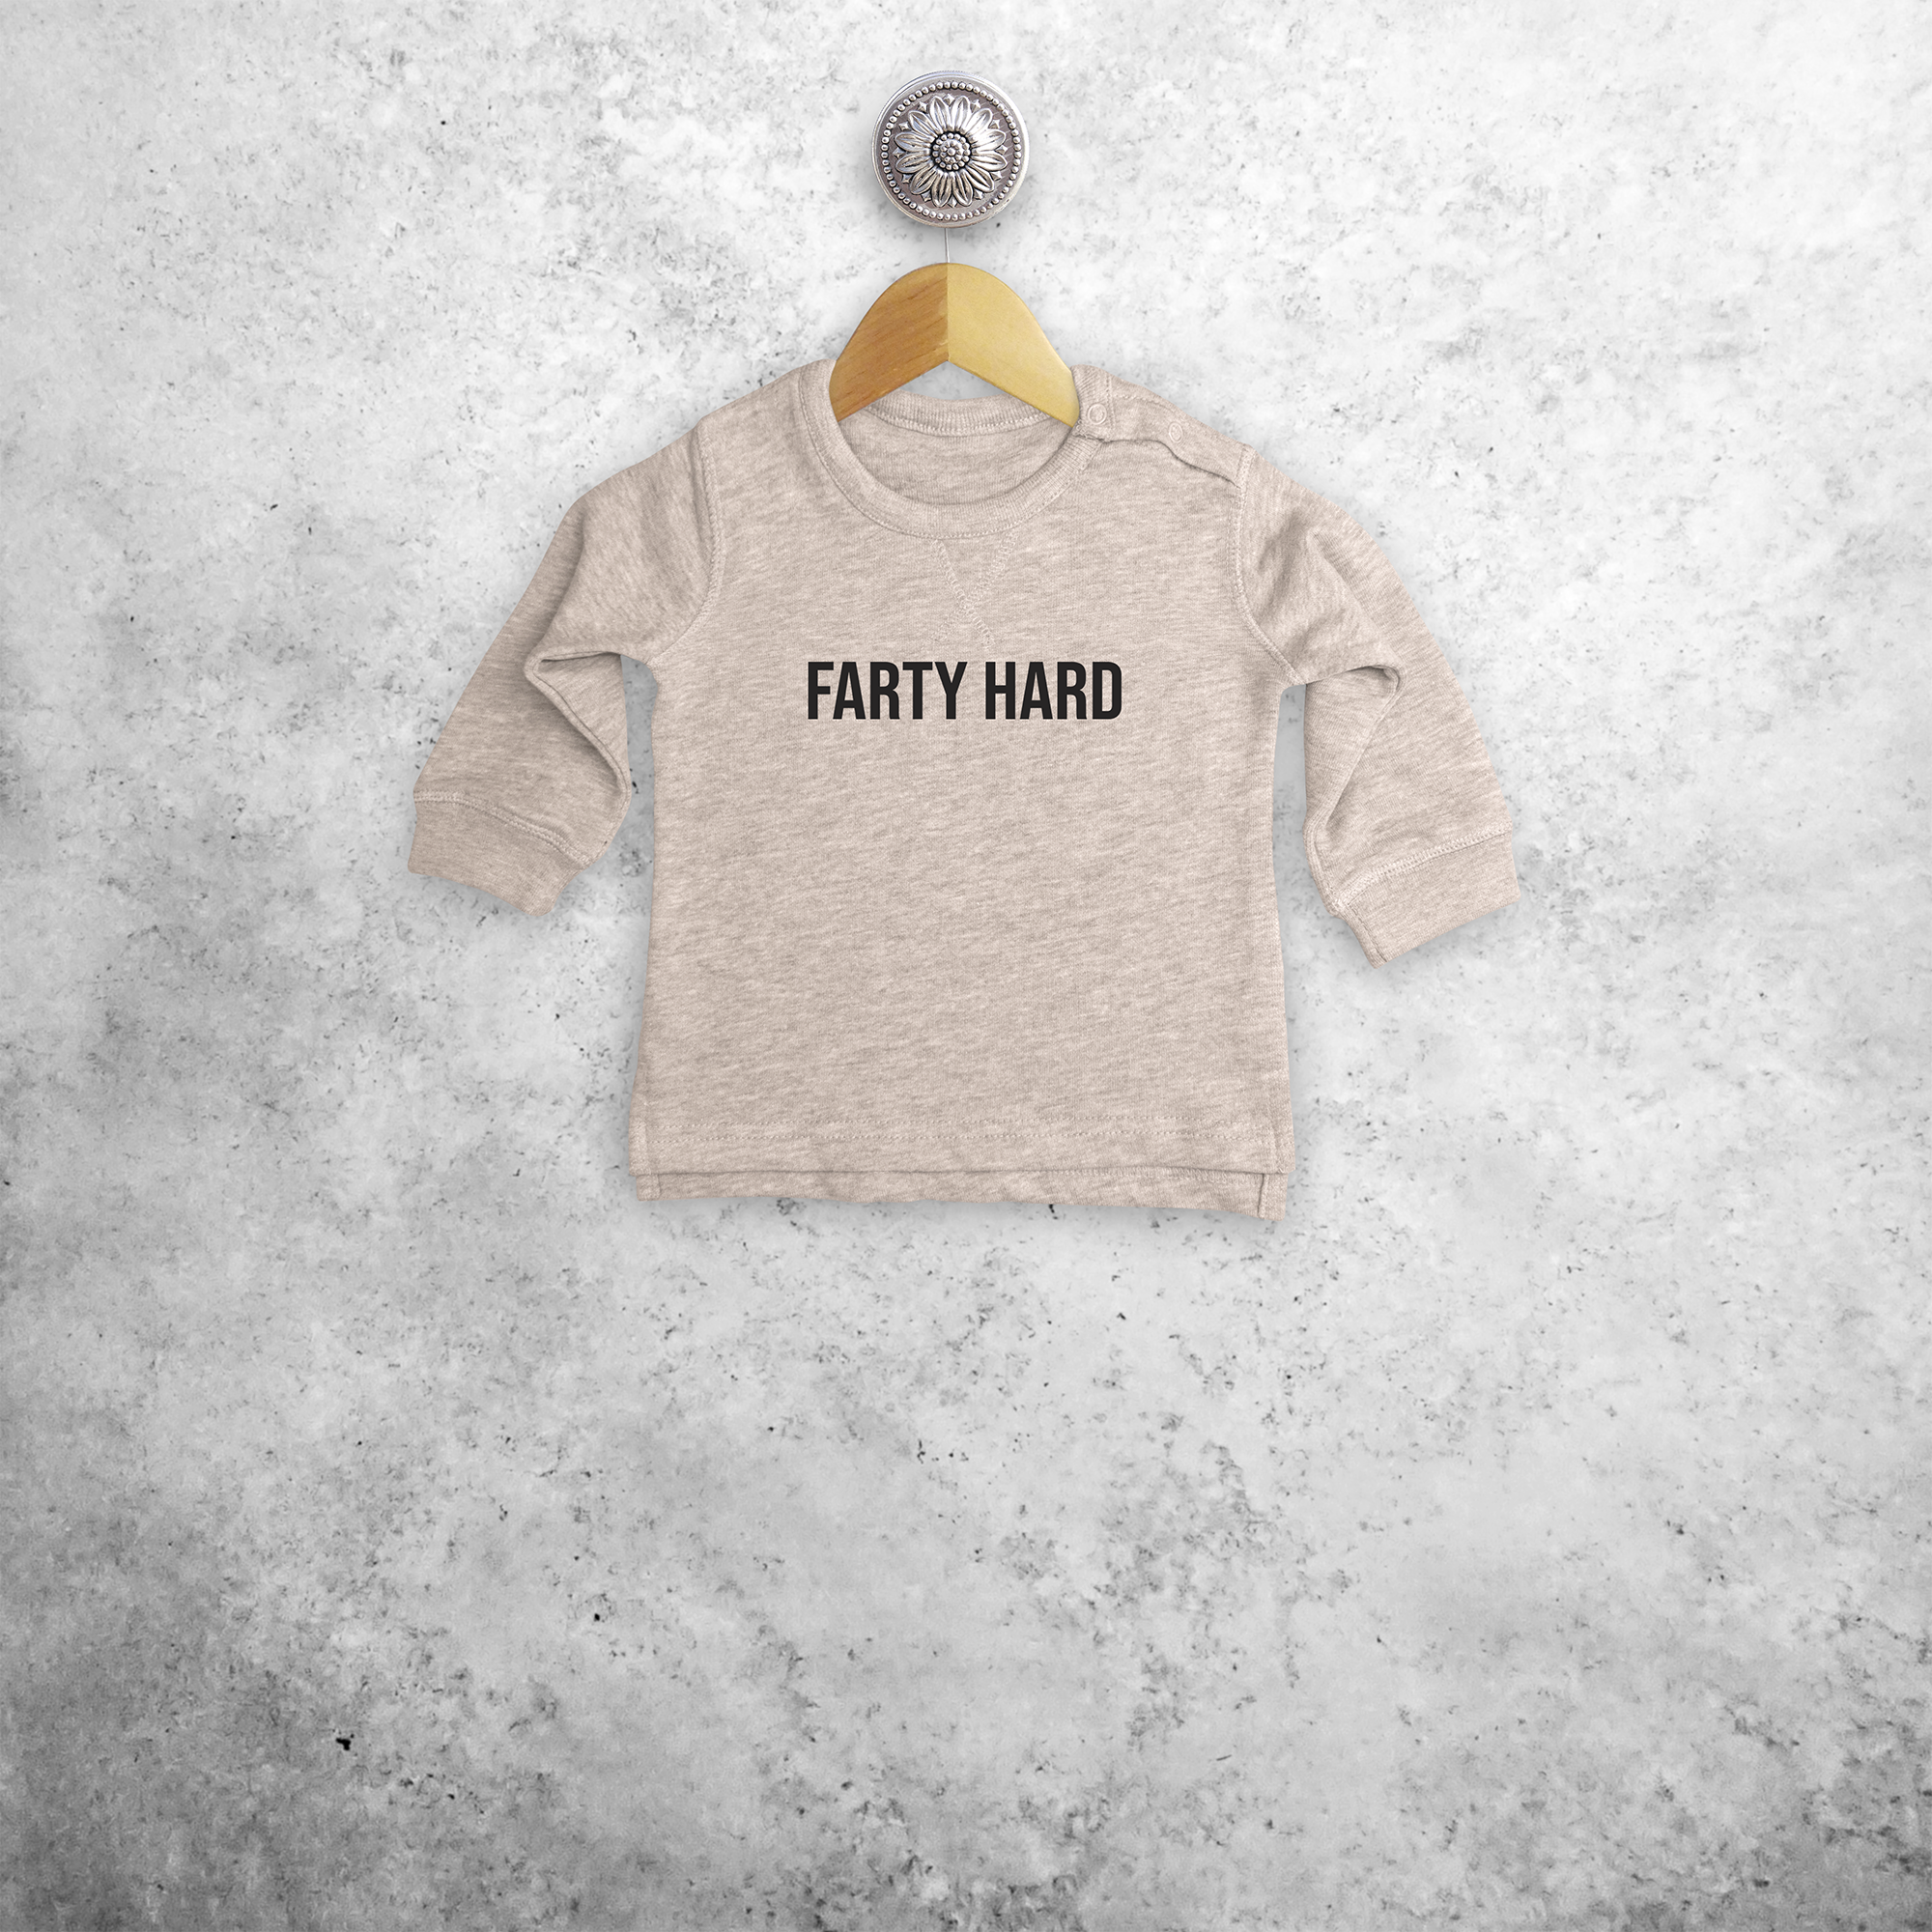 'Farty hard' baby sweater